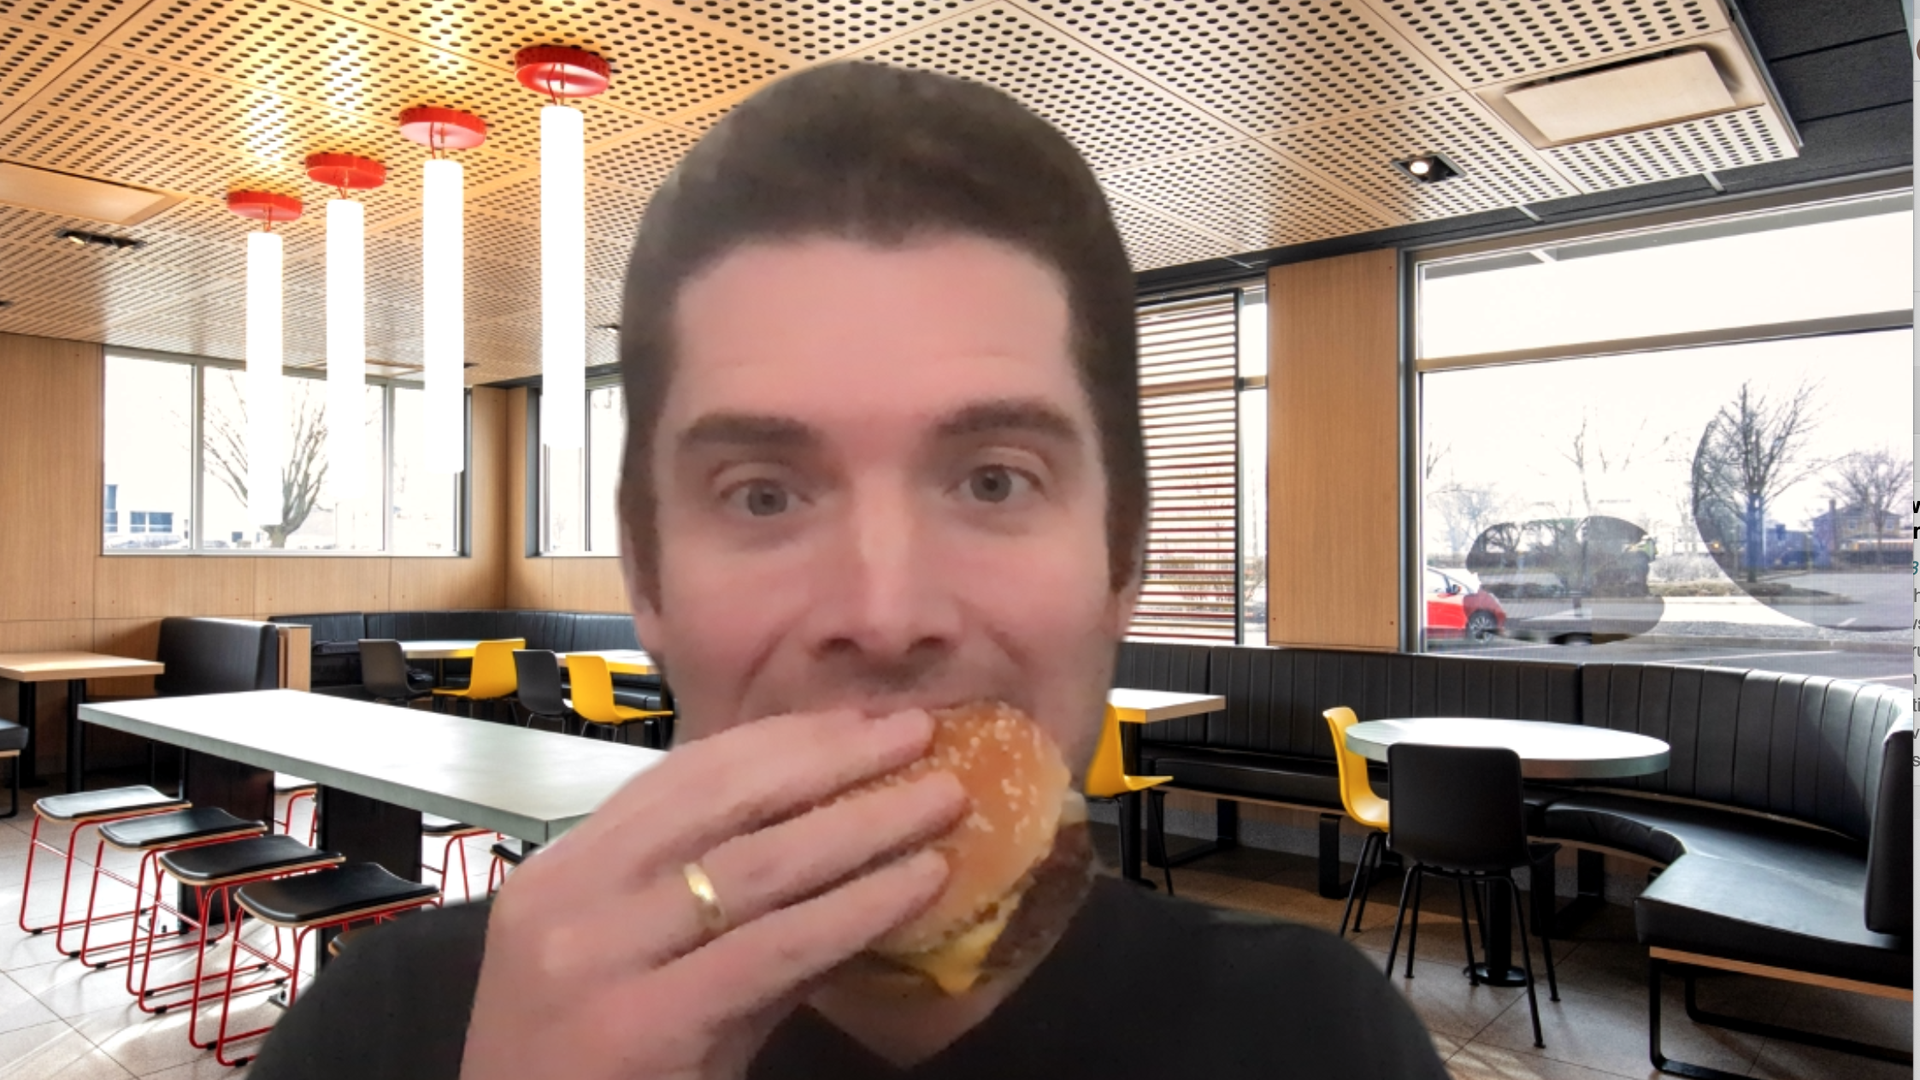 Image of the author eating a cheeseburger in front of a virtual McDonalds